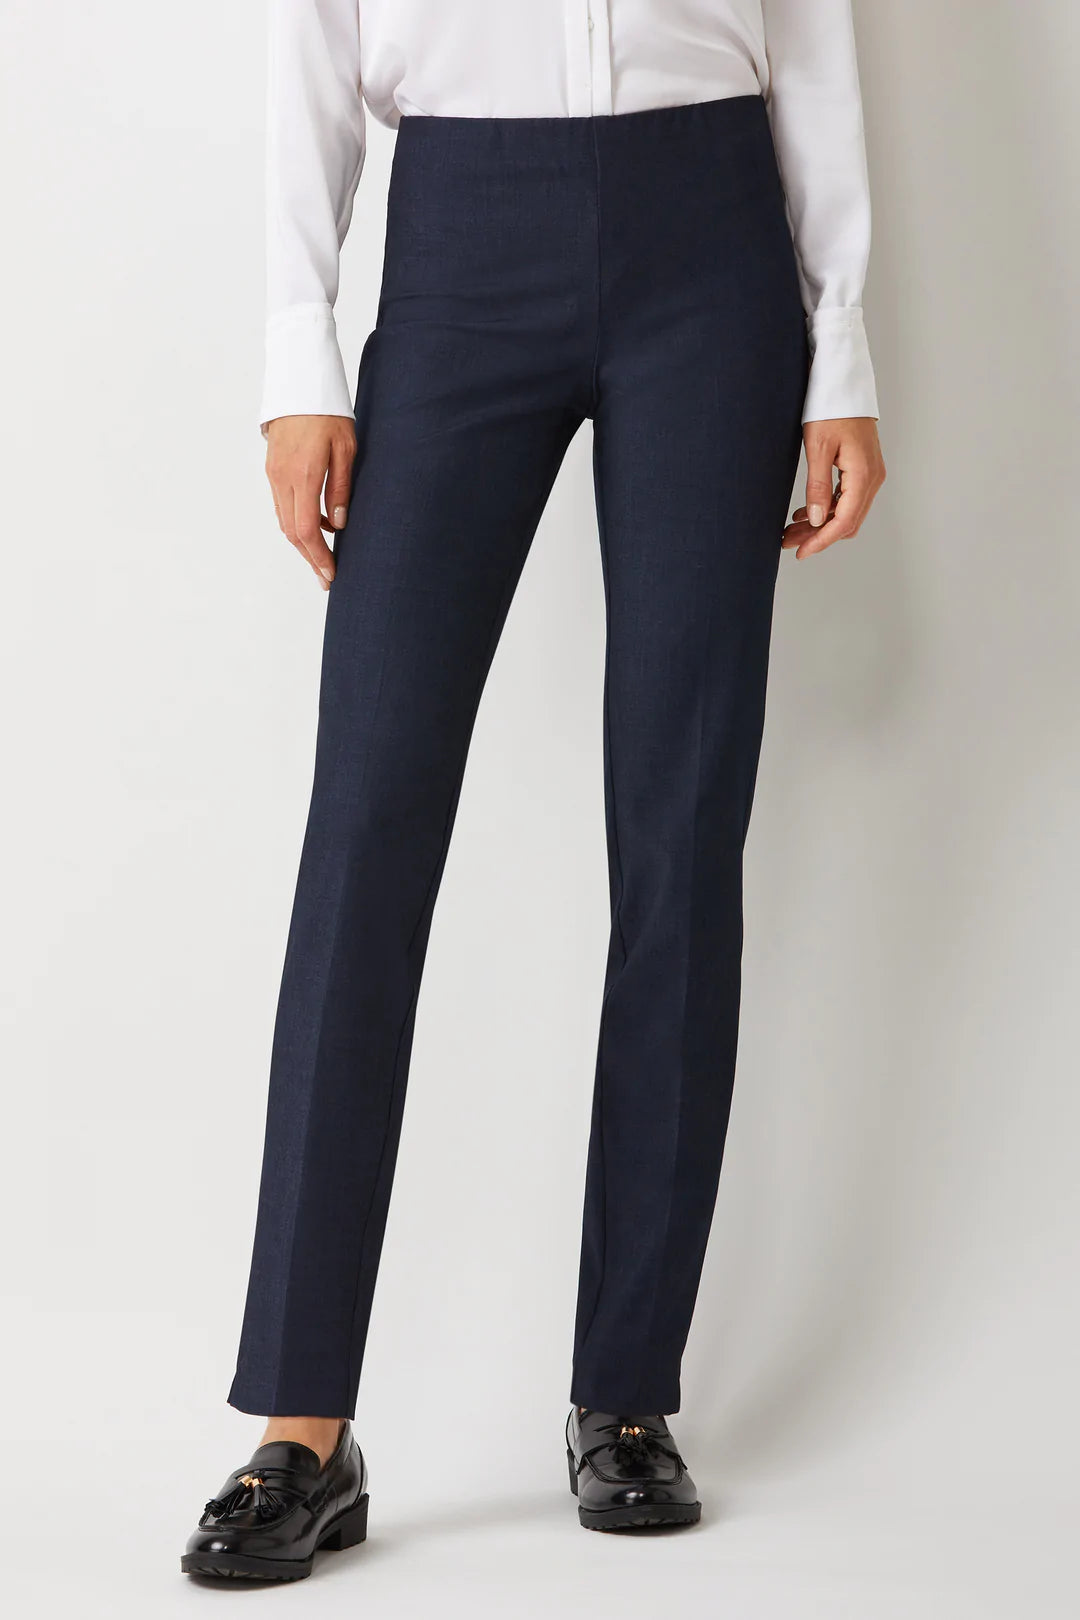 Springfield Pull On Pant - Madison's Niche 